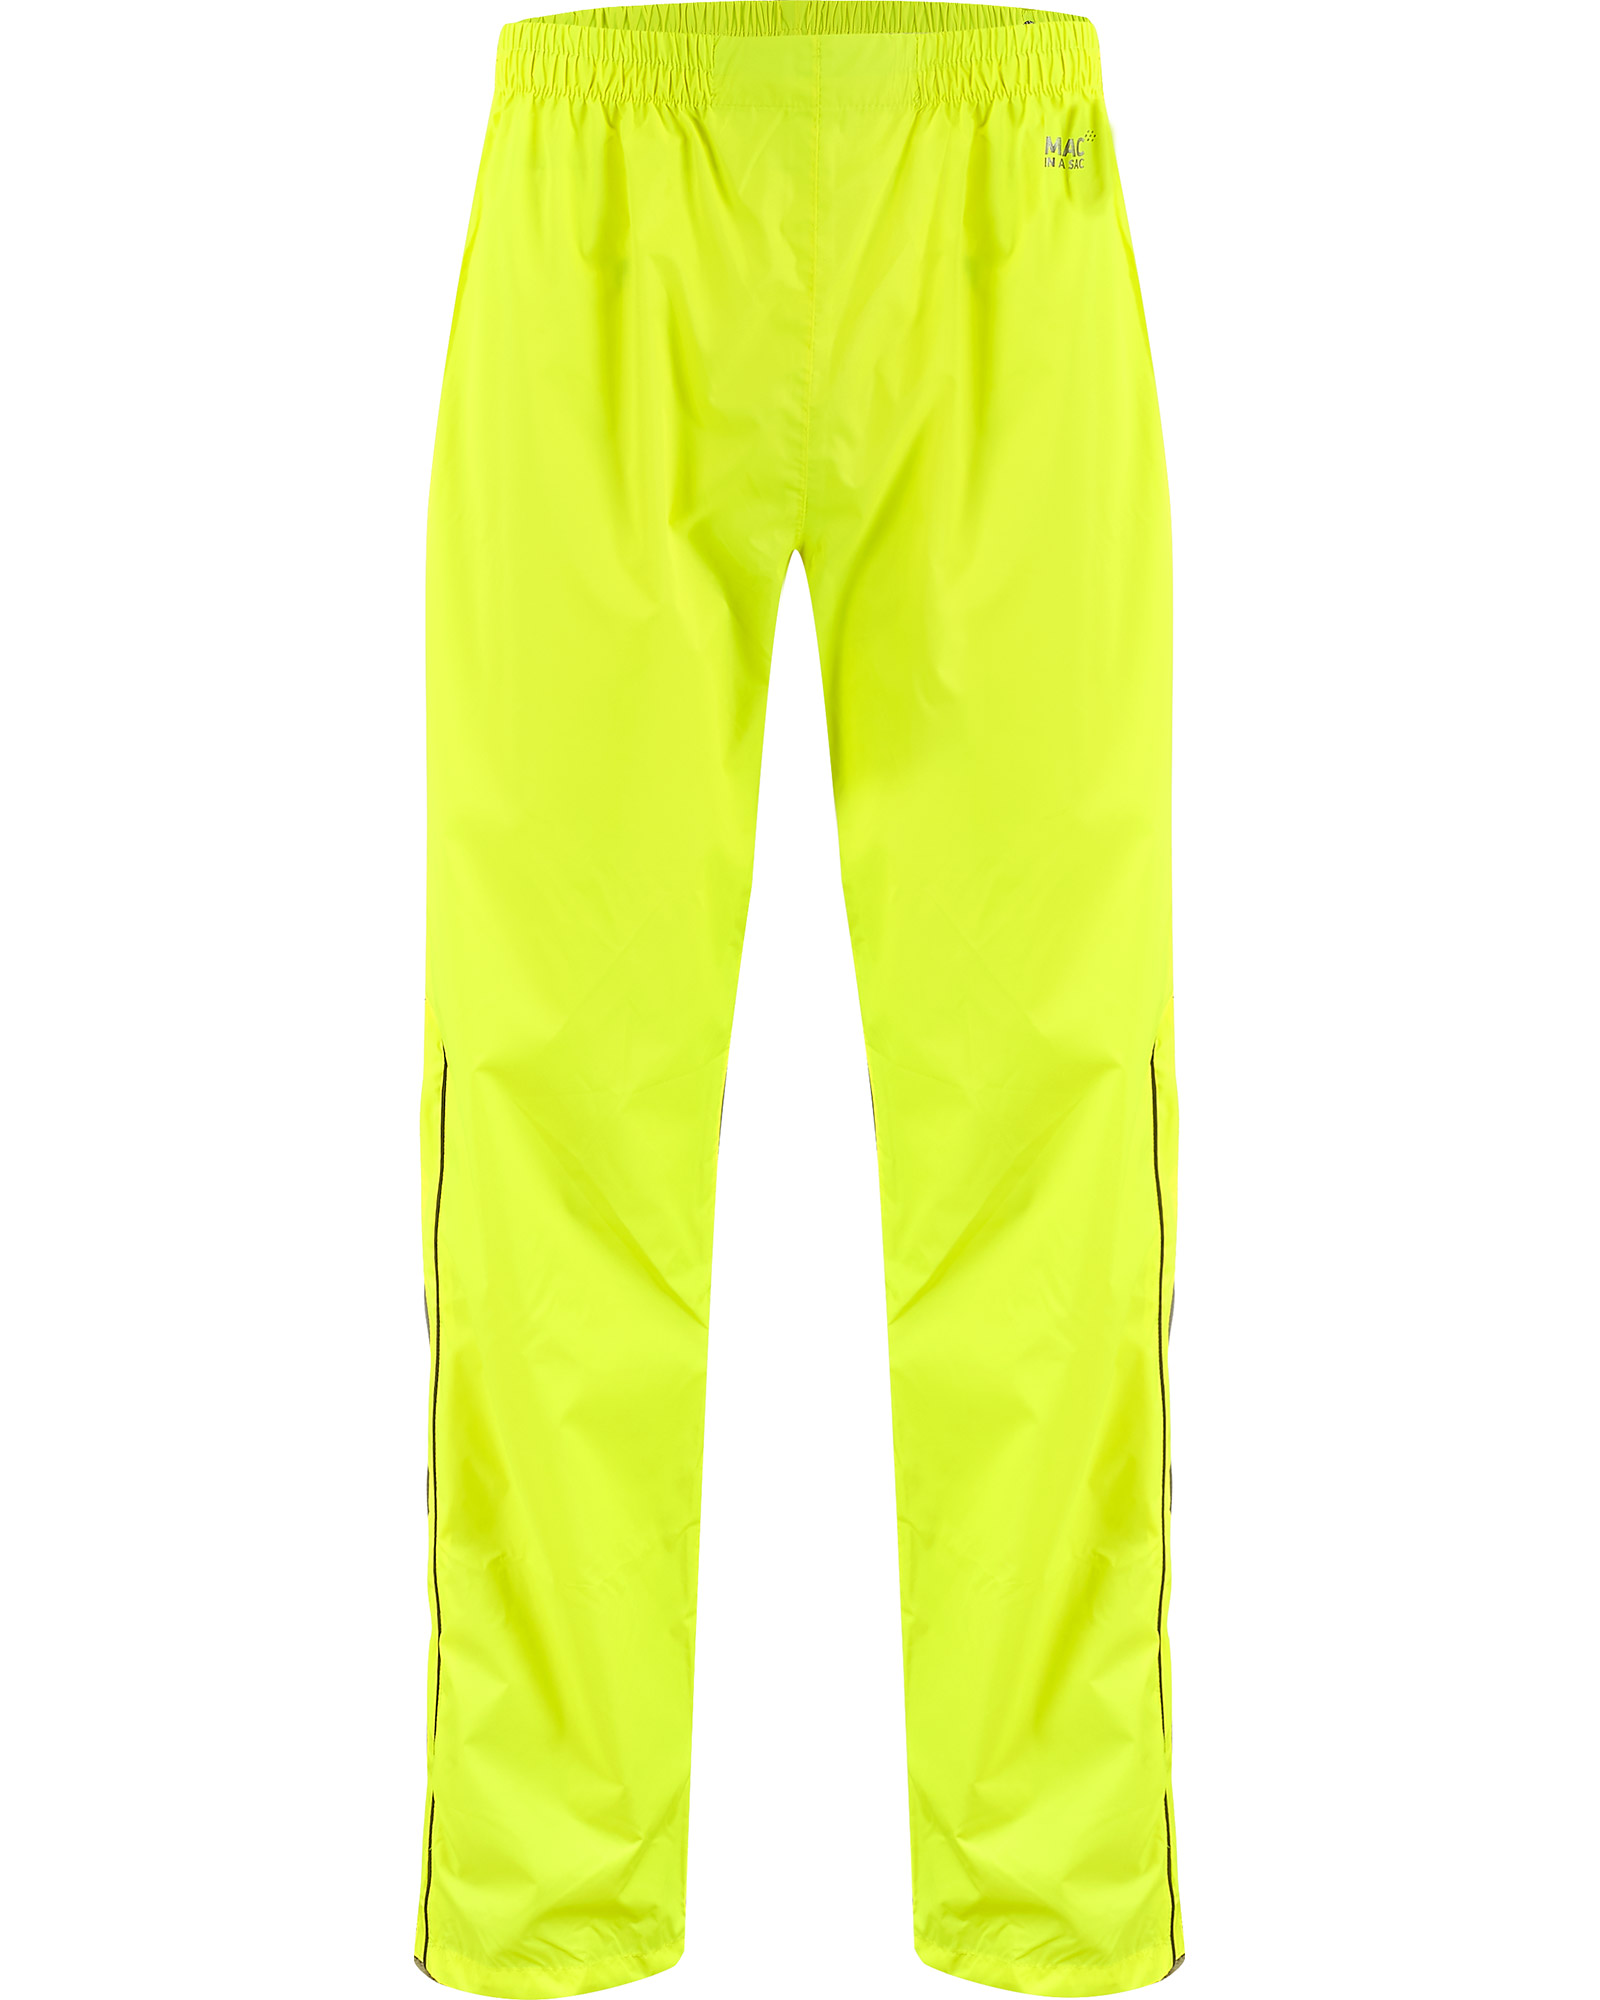 Target Dry Mac in a Sac Adult Full Zip Packable Waterproof Overtrousers - Neon Yellow S